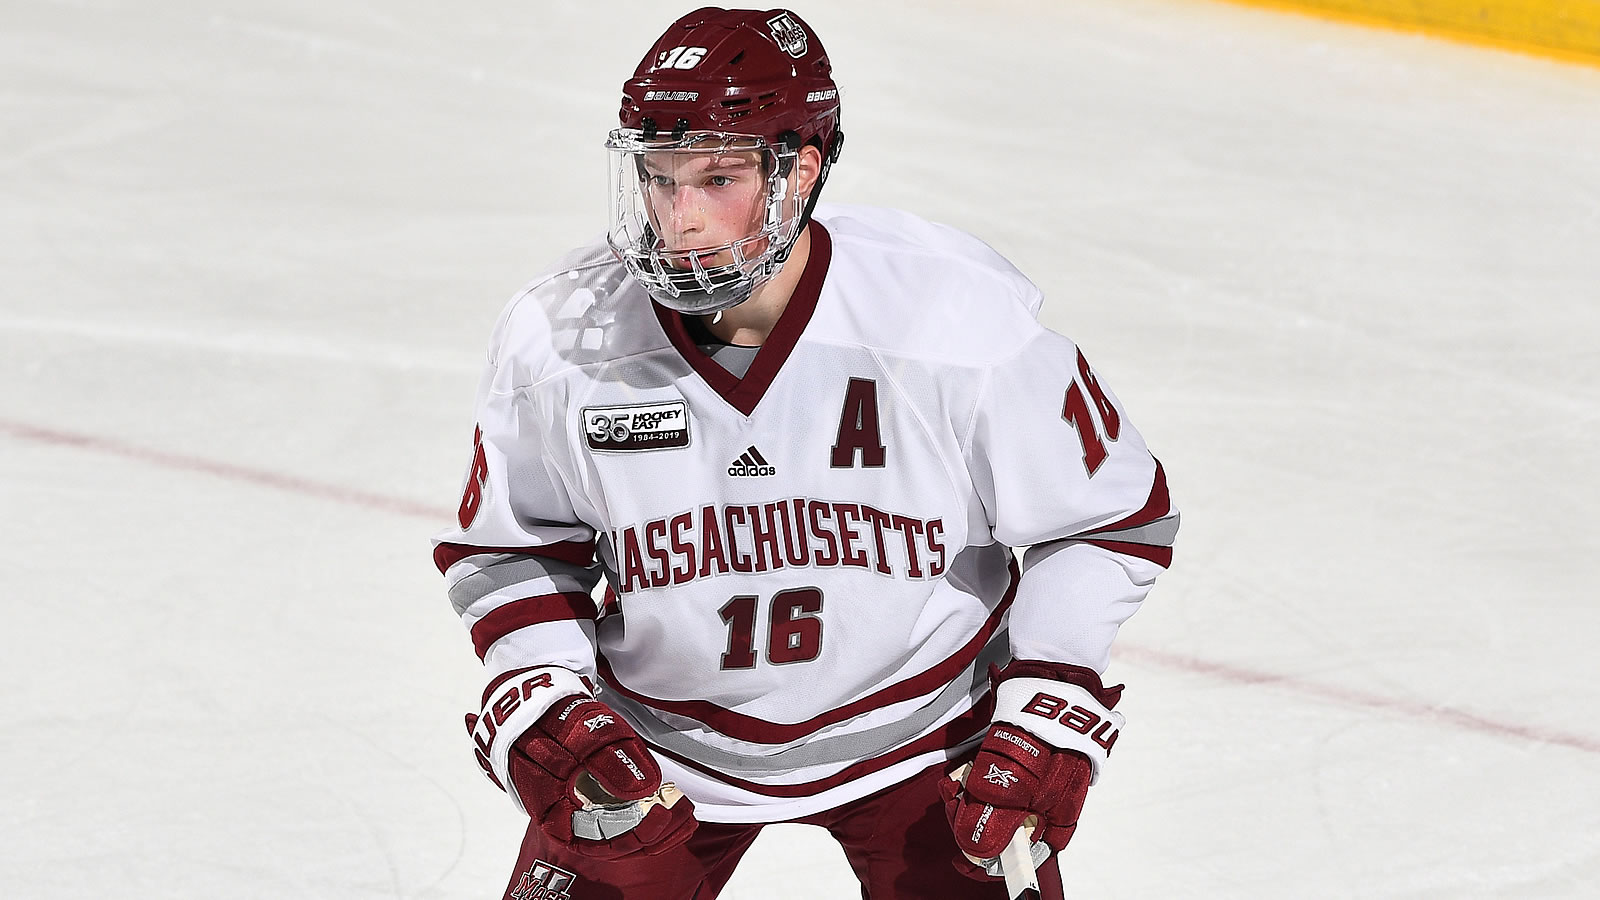 Record 73 Hockey East Alumni Named to NHL Rosters - Hockey East Association